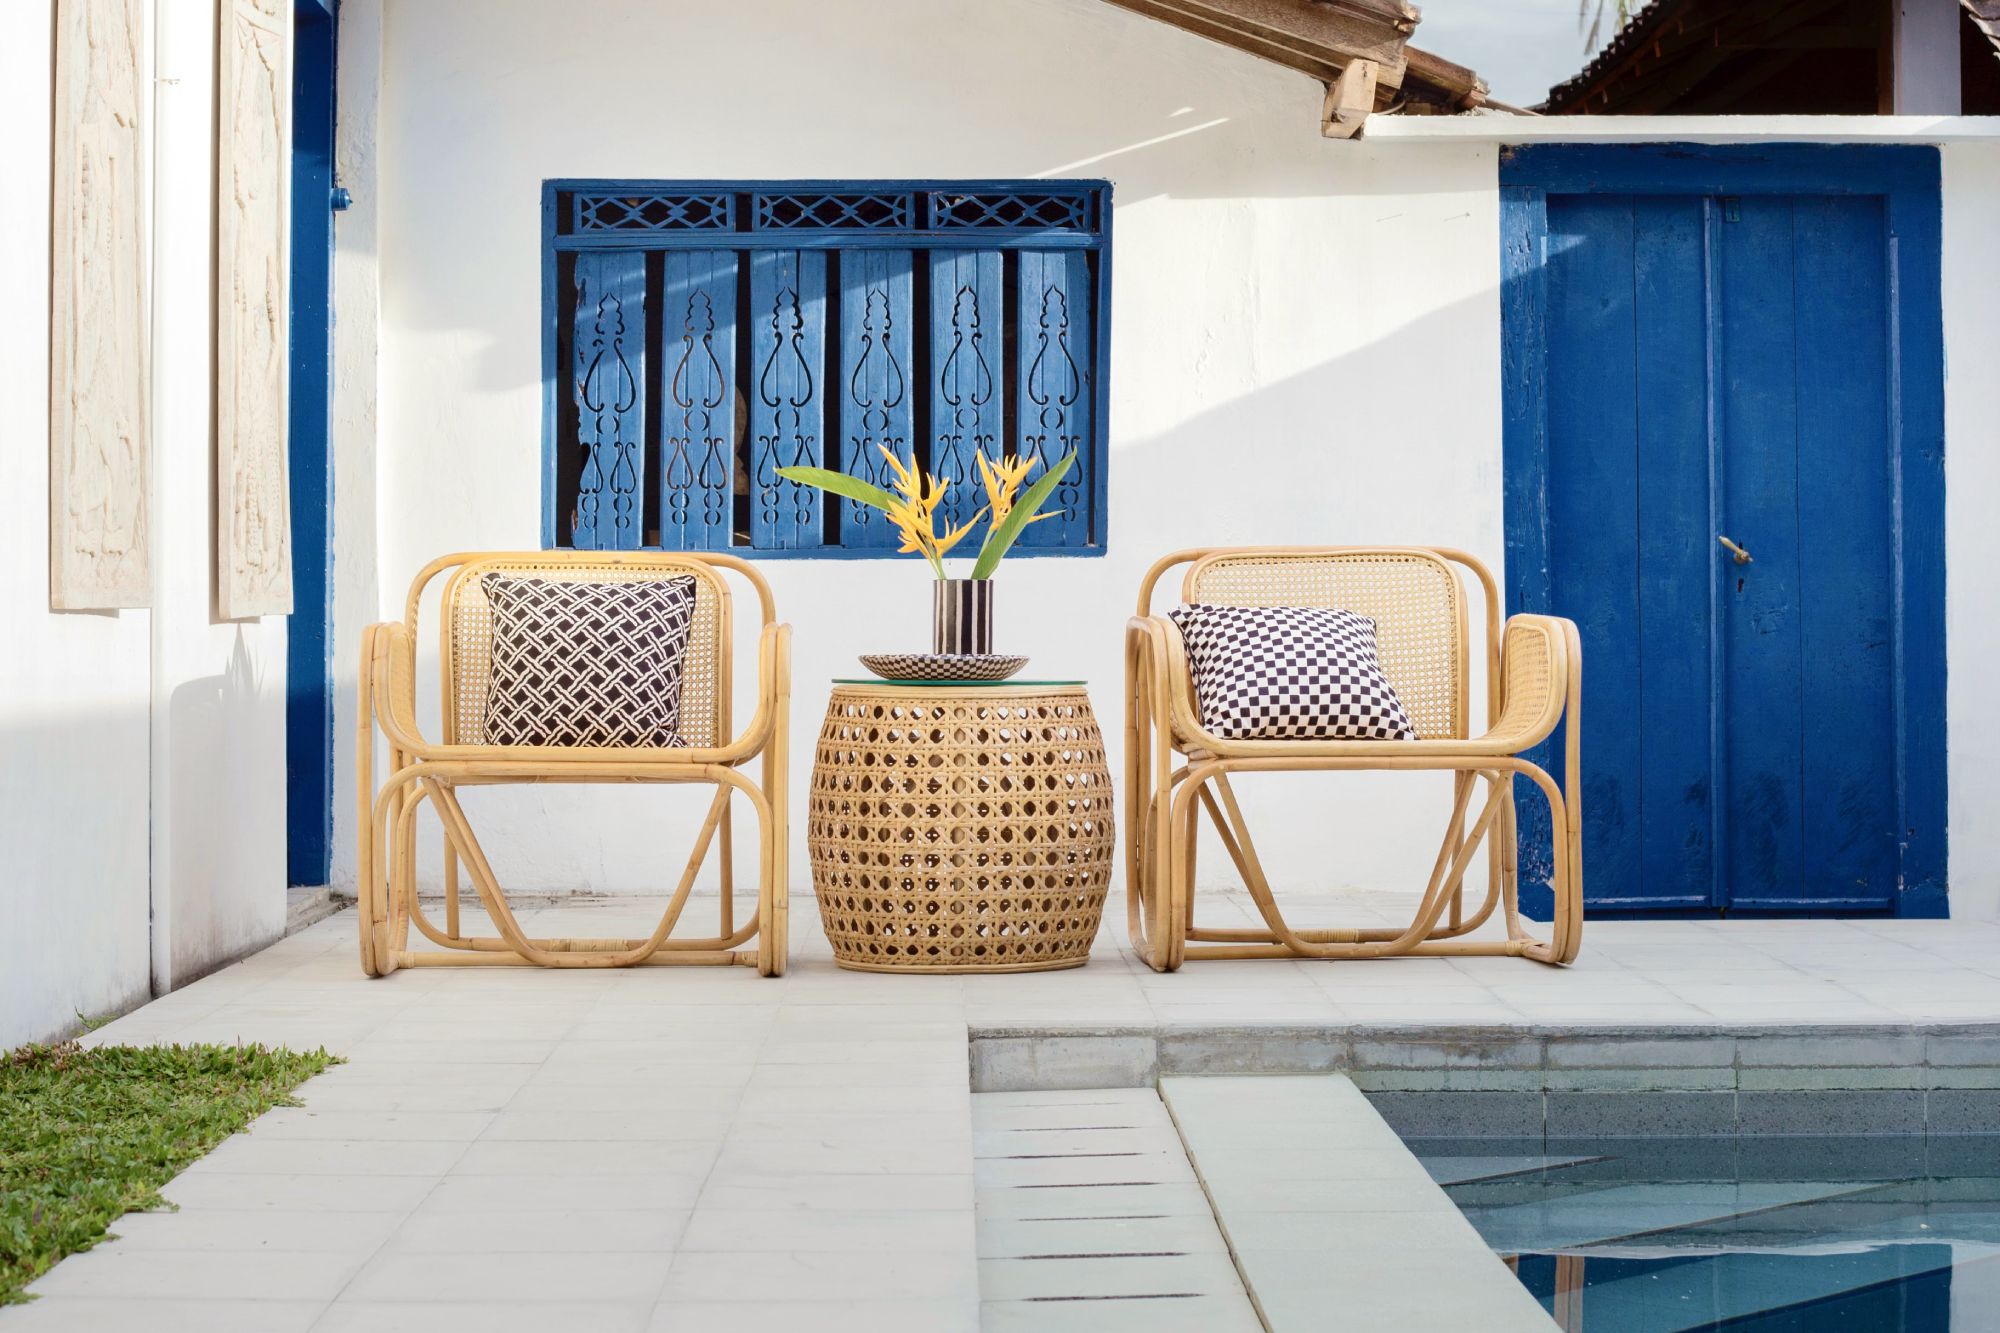 Bamboo chairs outdoor by pool; bamboo furniture